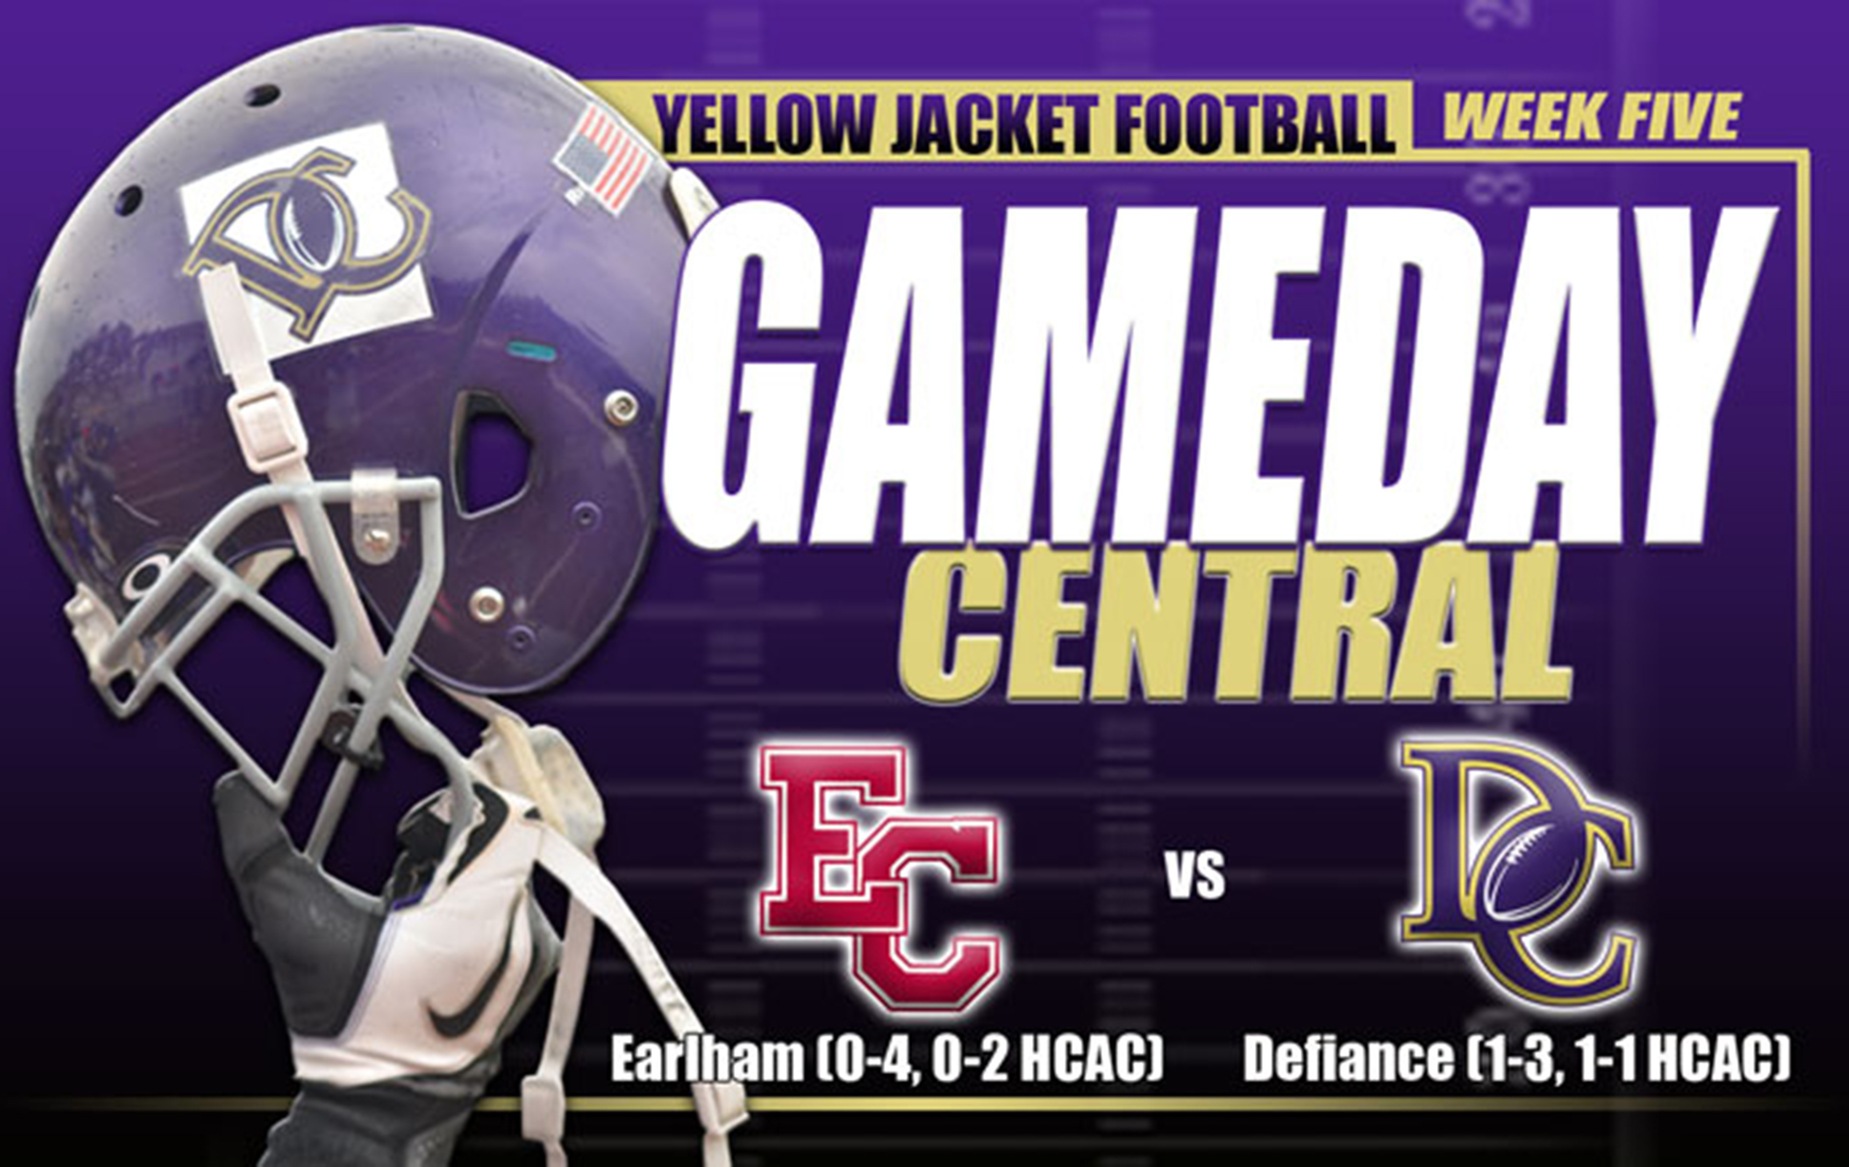 GAMEDAY CENTRAL - Defiance at Earlham - Game Five